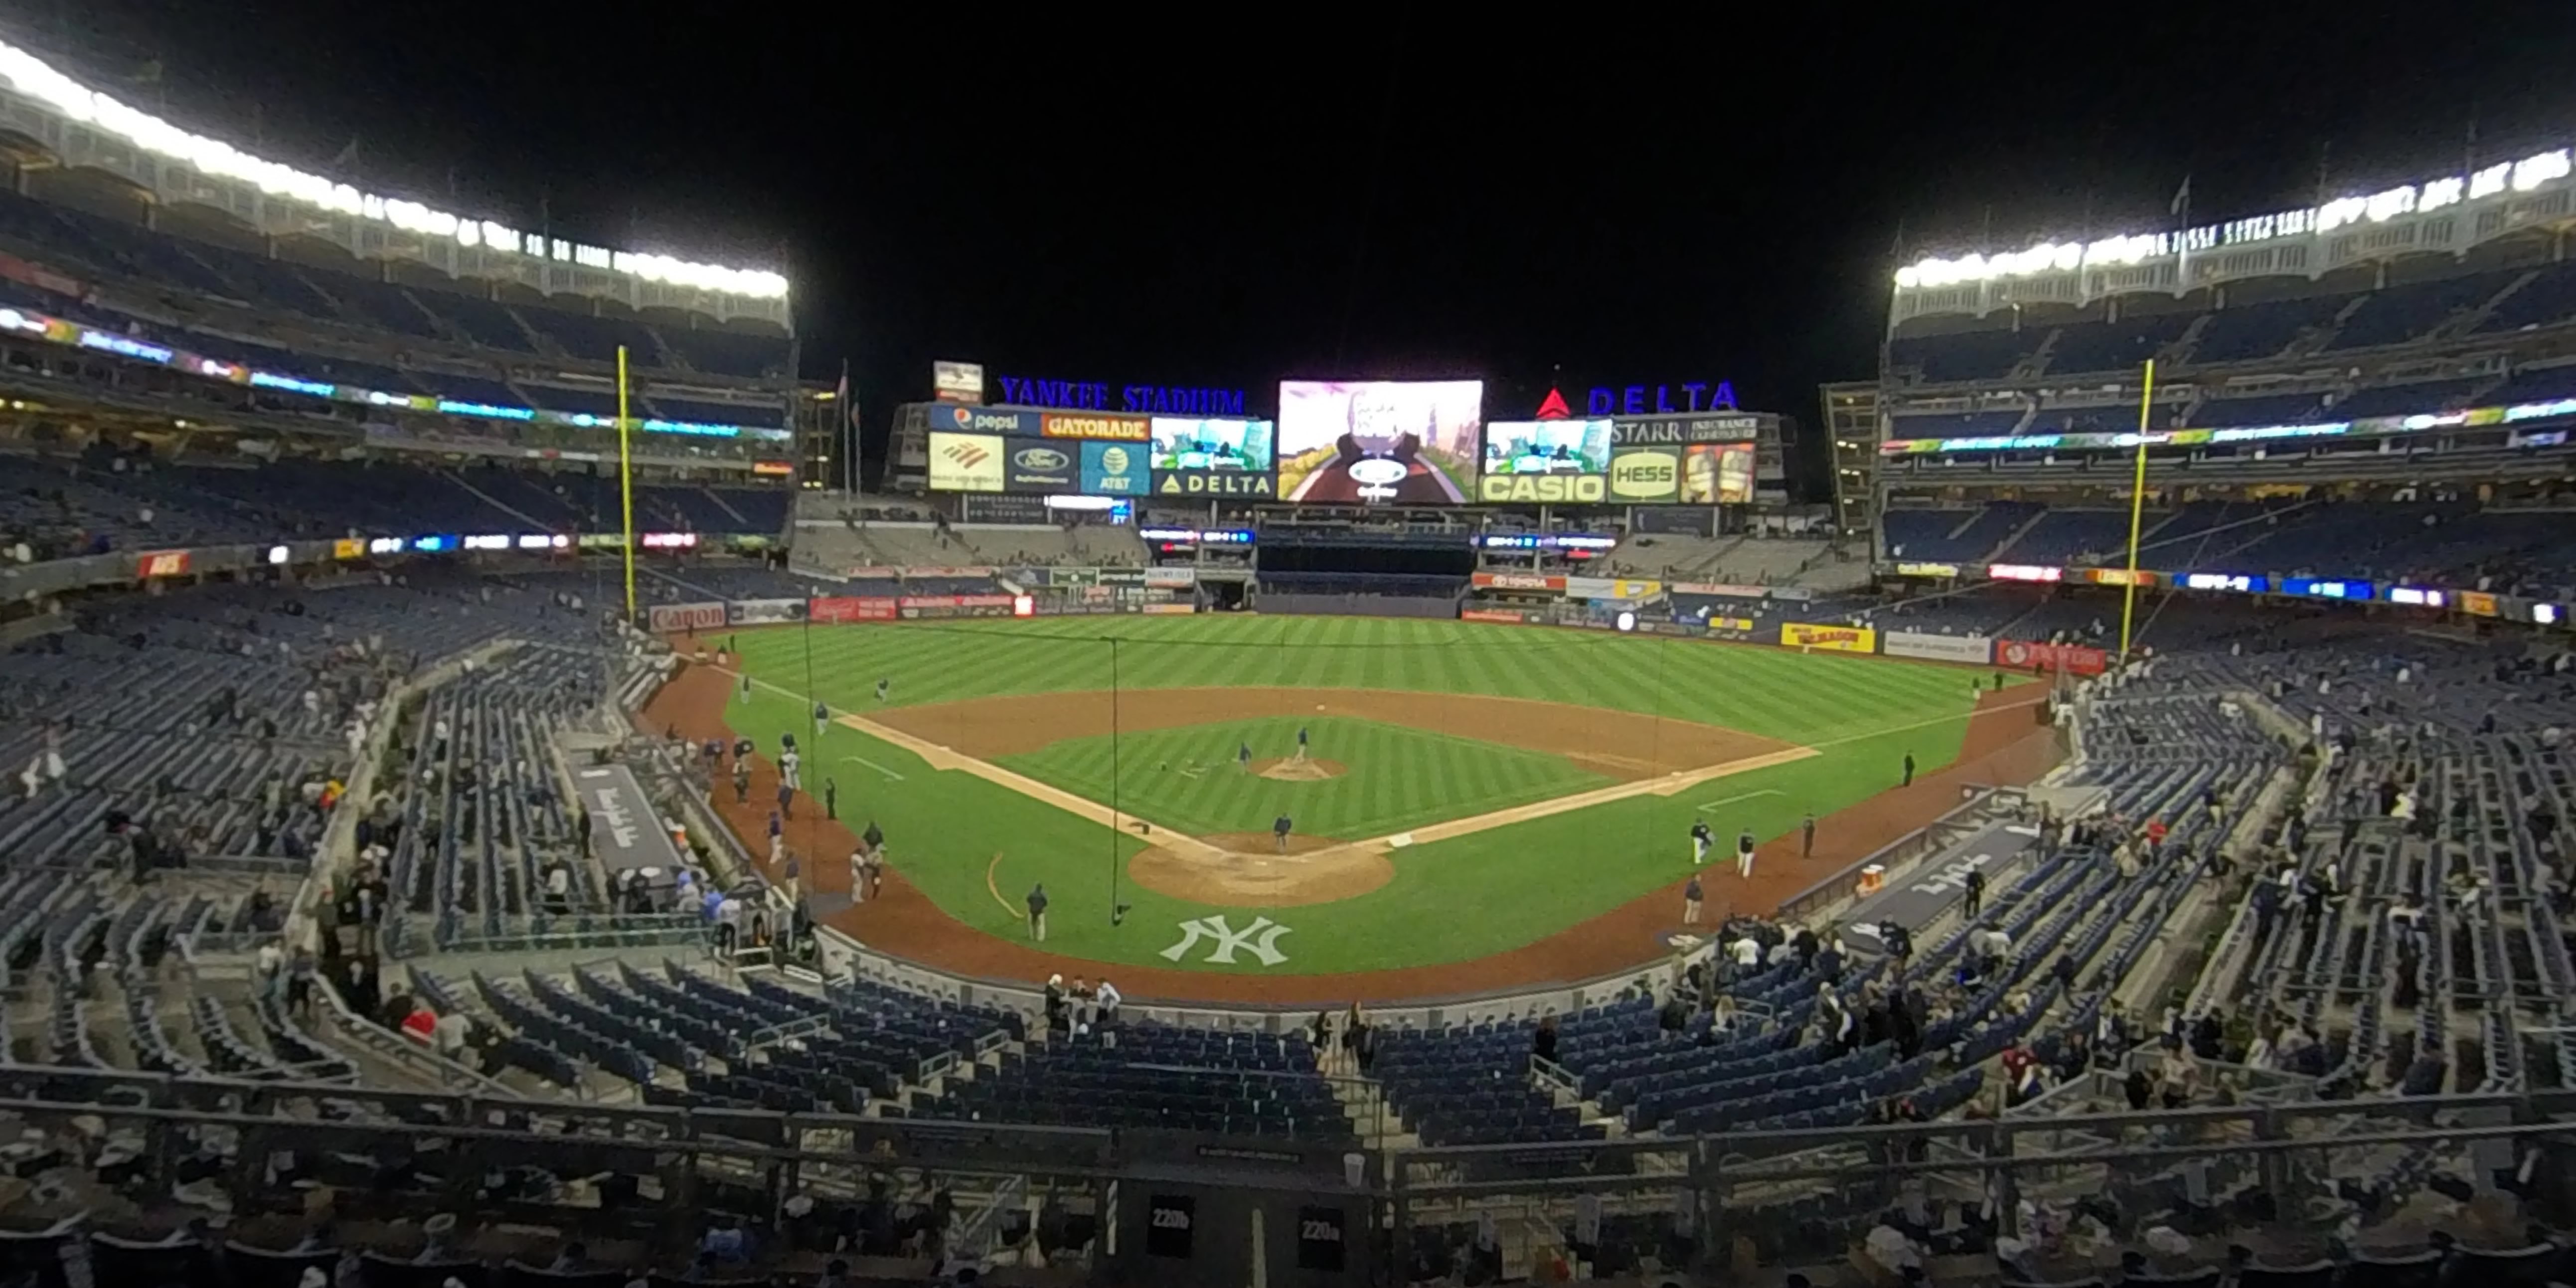 section 220a panoramic seat view  for baseball - yankee stadium